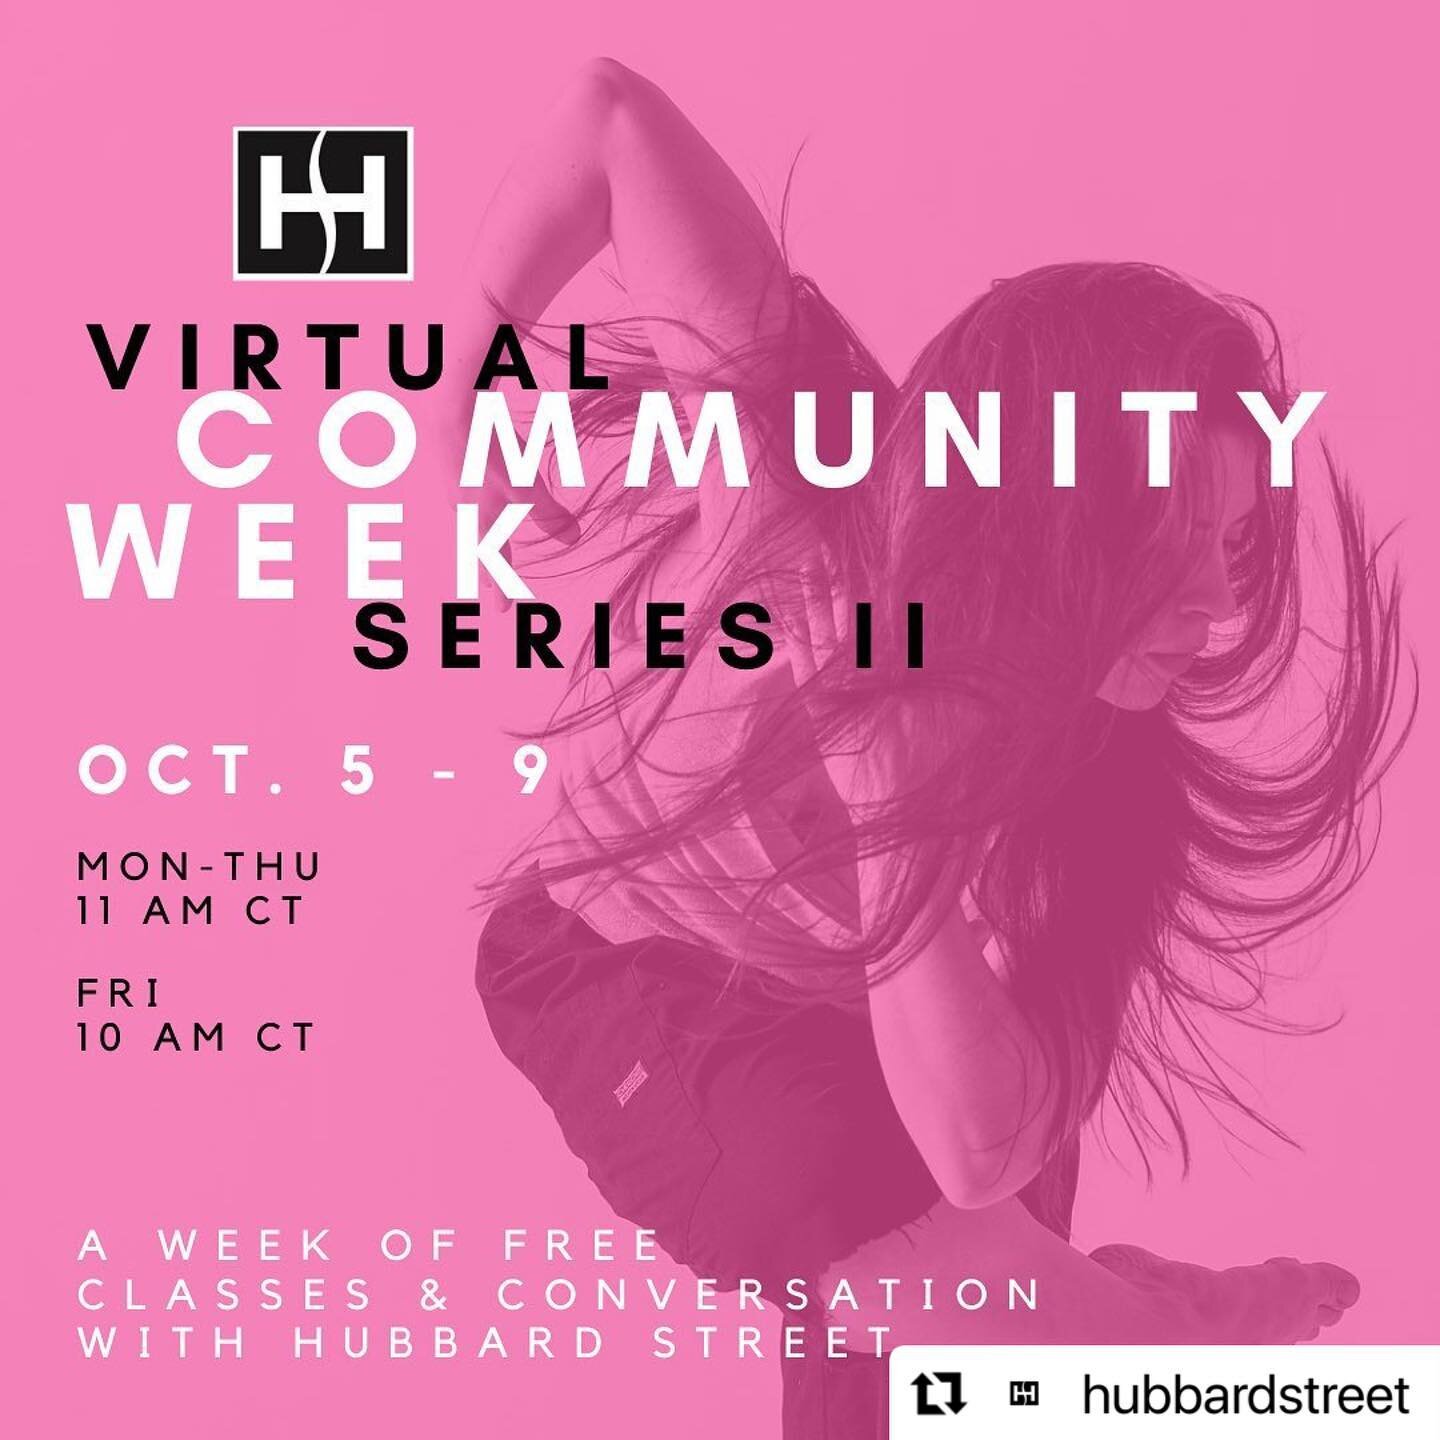 MOVE - This week @hubbardstreet continues their Community Week series with a line up of classes + conversations. Available for free (though donations are appreciated), these events are held across Facebook Live, Instagram Live and Zoom simultaneously